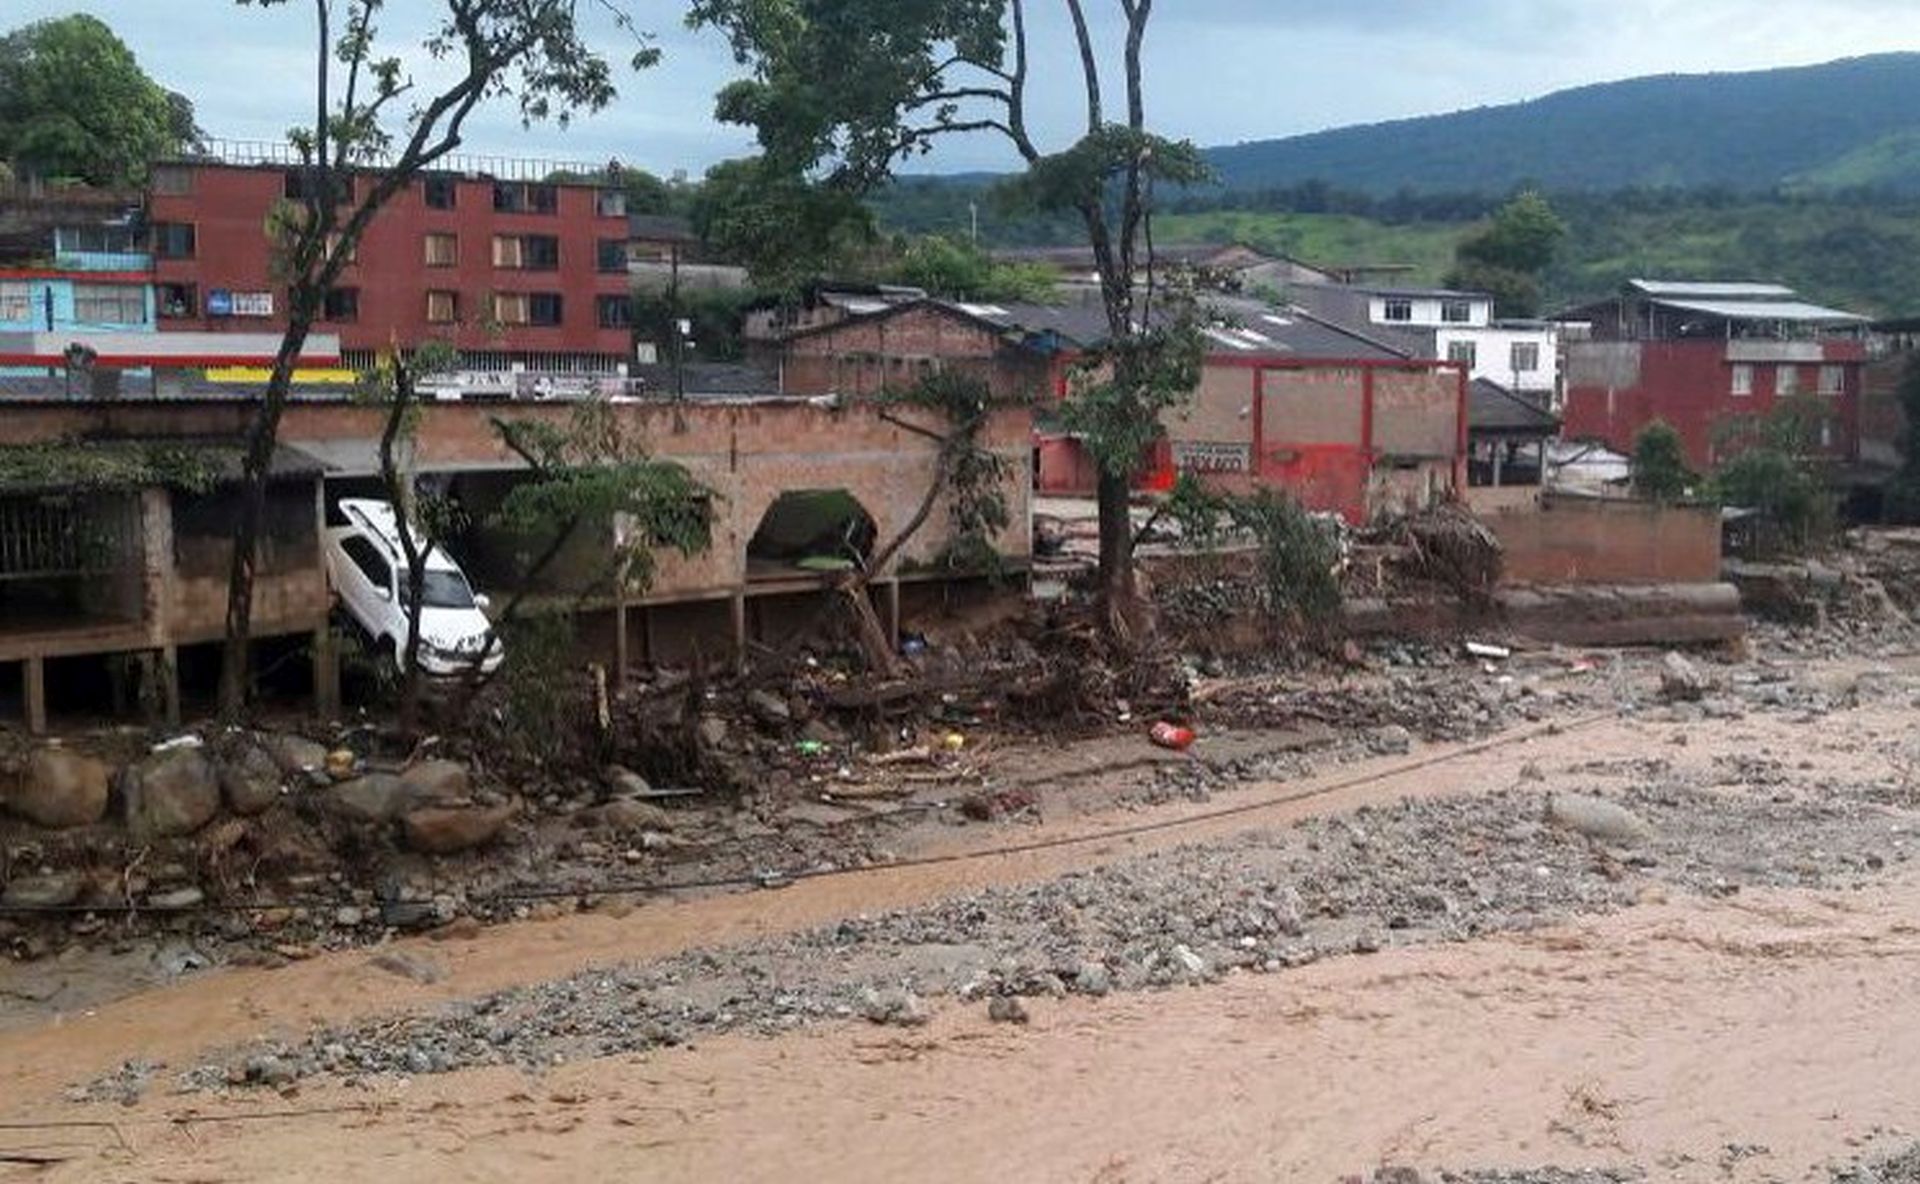 epa05883403 A handout picture provided by the Colombian Army shows the damages caused by a landslide in Mocoa, Colombia, 01 April 2017. At least 154 people died, 400 were injured and 200 are still missing after the landslide caused by the flood of three rivers that devastated several districts of the Colombian city of Mocoa, capital of the department of Putumayo in the south of the country, confirmed official sources today.  EPA/COLOMBIAN ARMY / HANDOUT  HANDOUT EDITORIAL USE ONLY/NO SALES